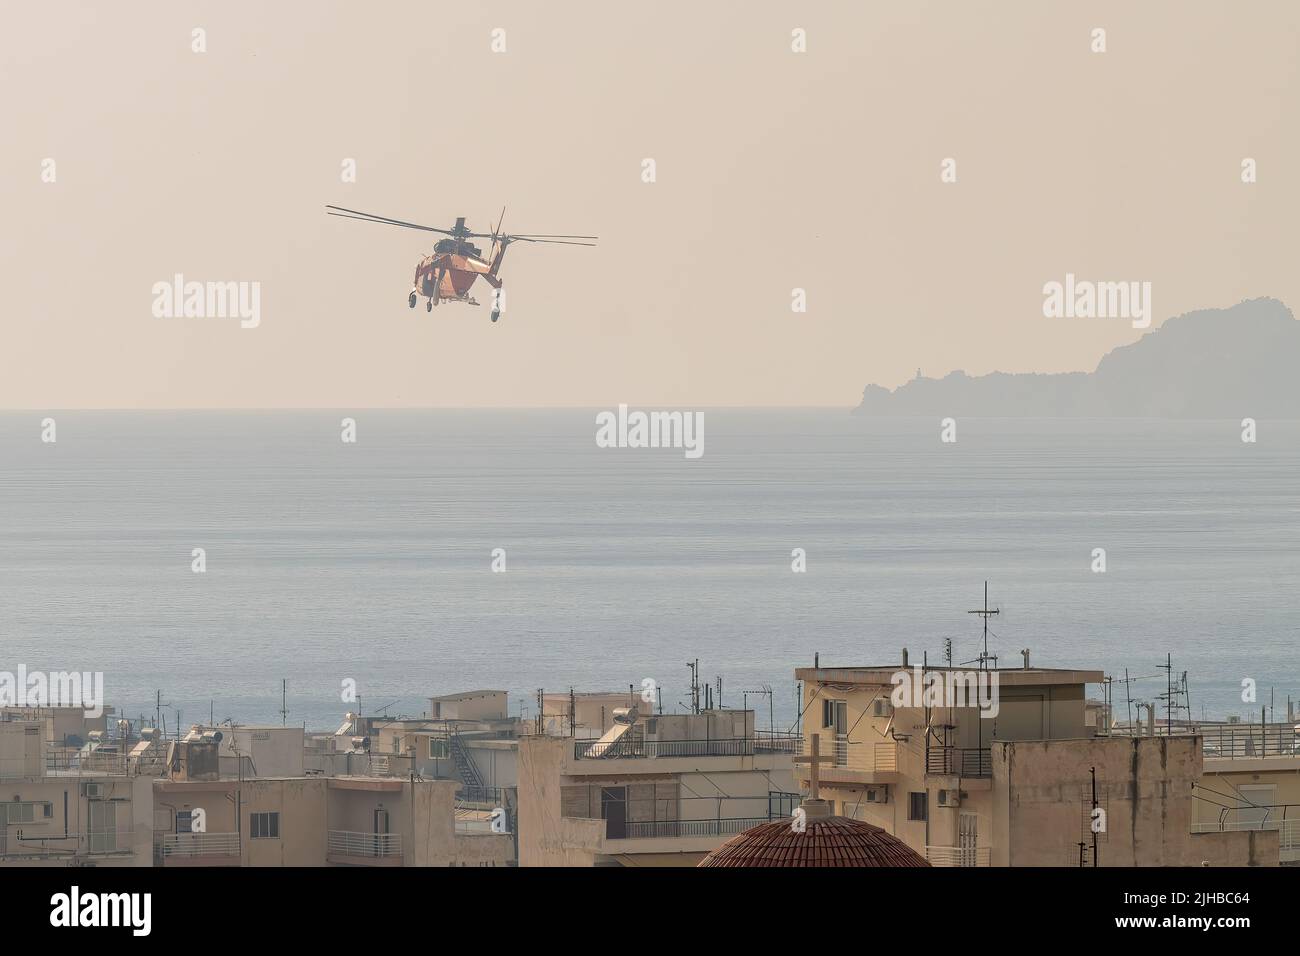 Loutraki, Greece 14 September 2019. Fire helicopter against the sky at Loutraki in Greece. Stock Photo